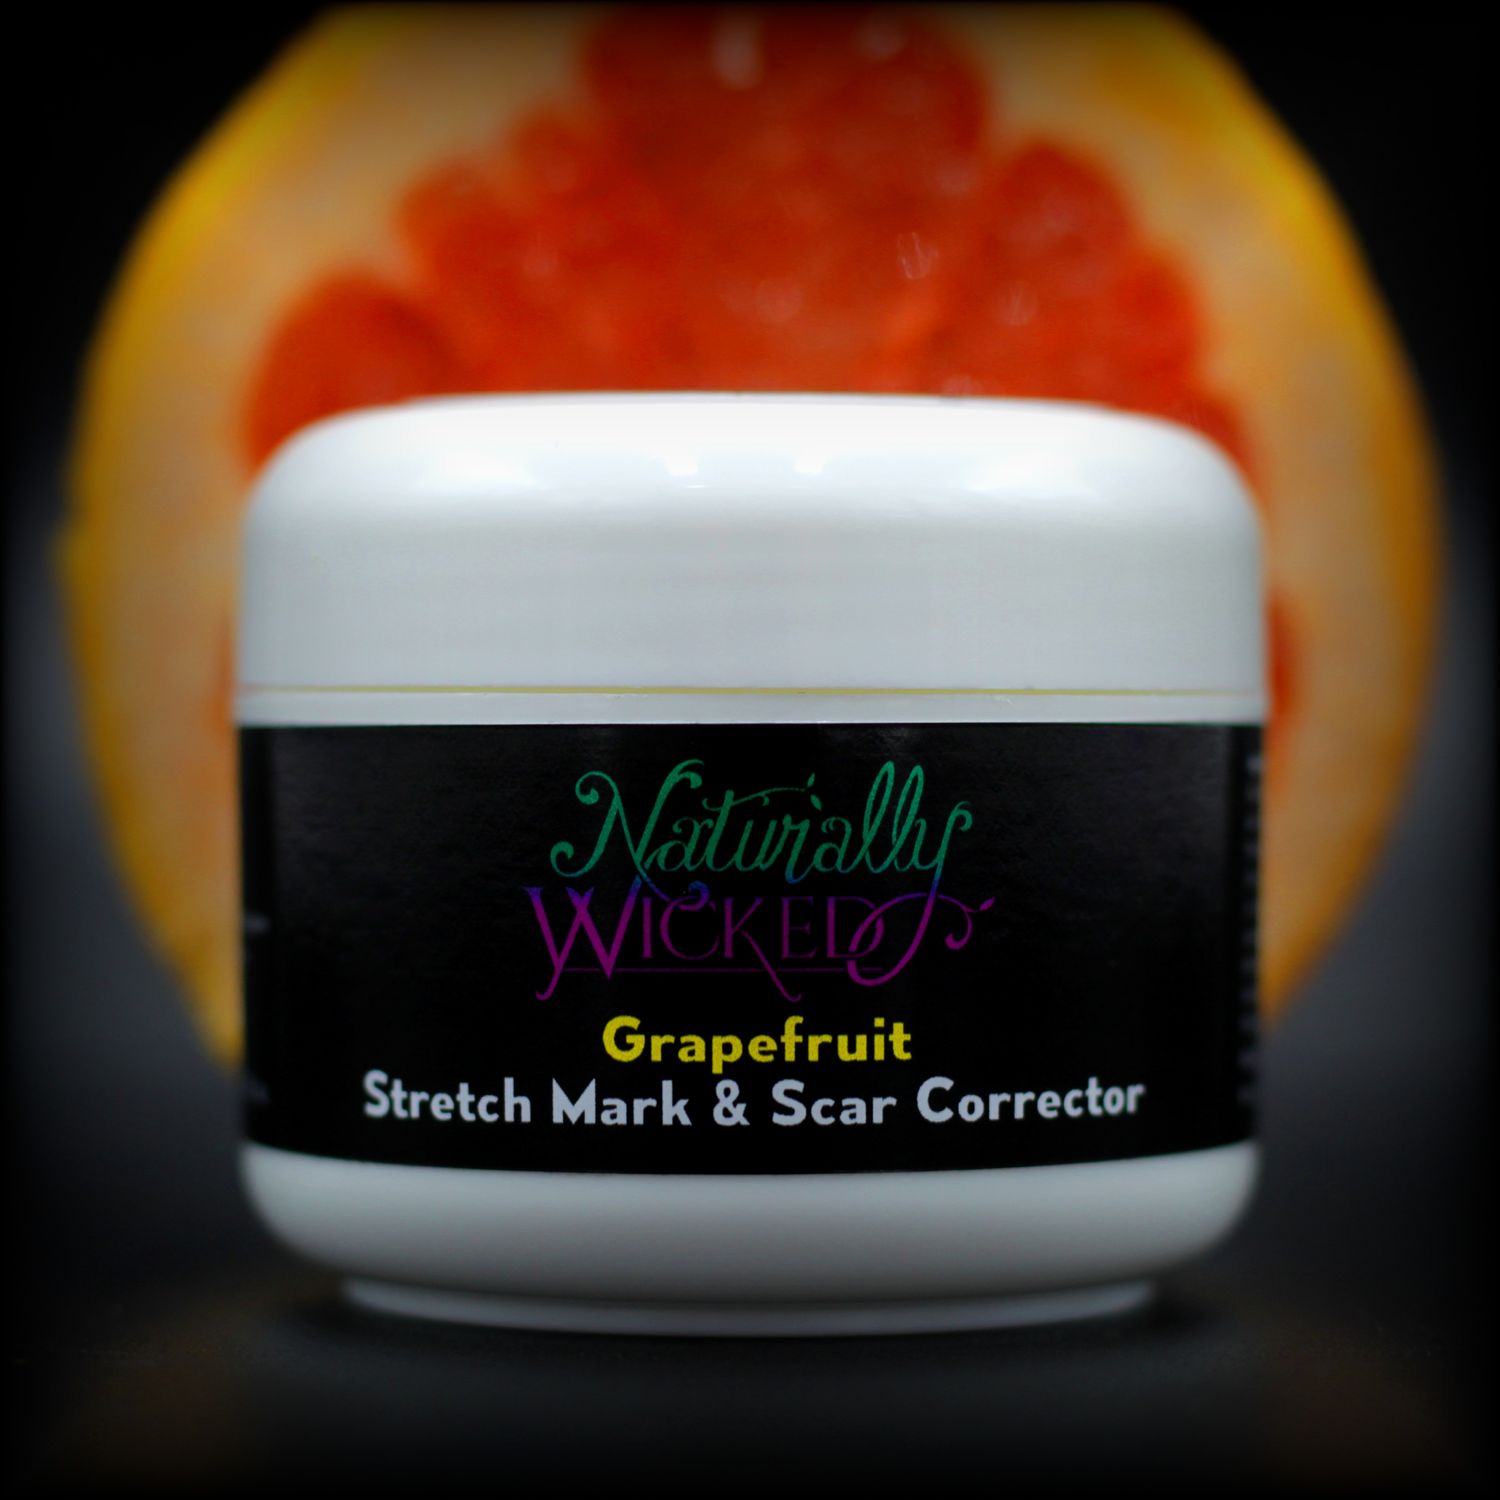 Naturally Wicked Grapefruit Stretch Mark & Scar Corrector In Front Of Red Sliced Grapefruit